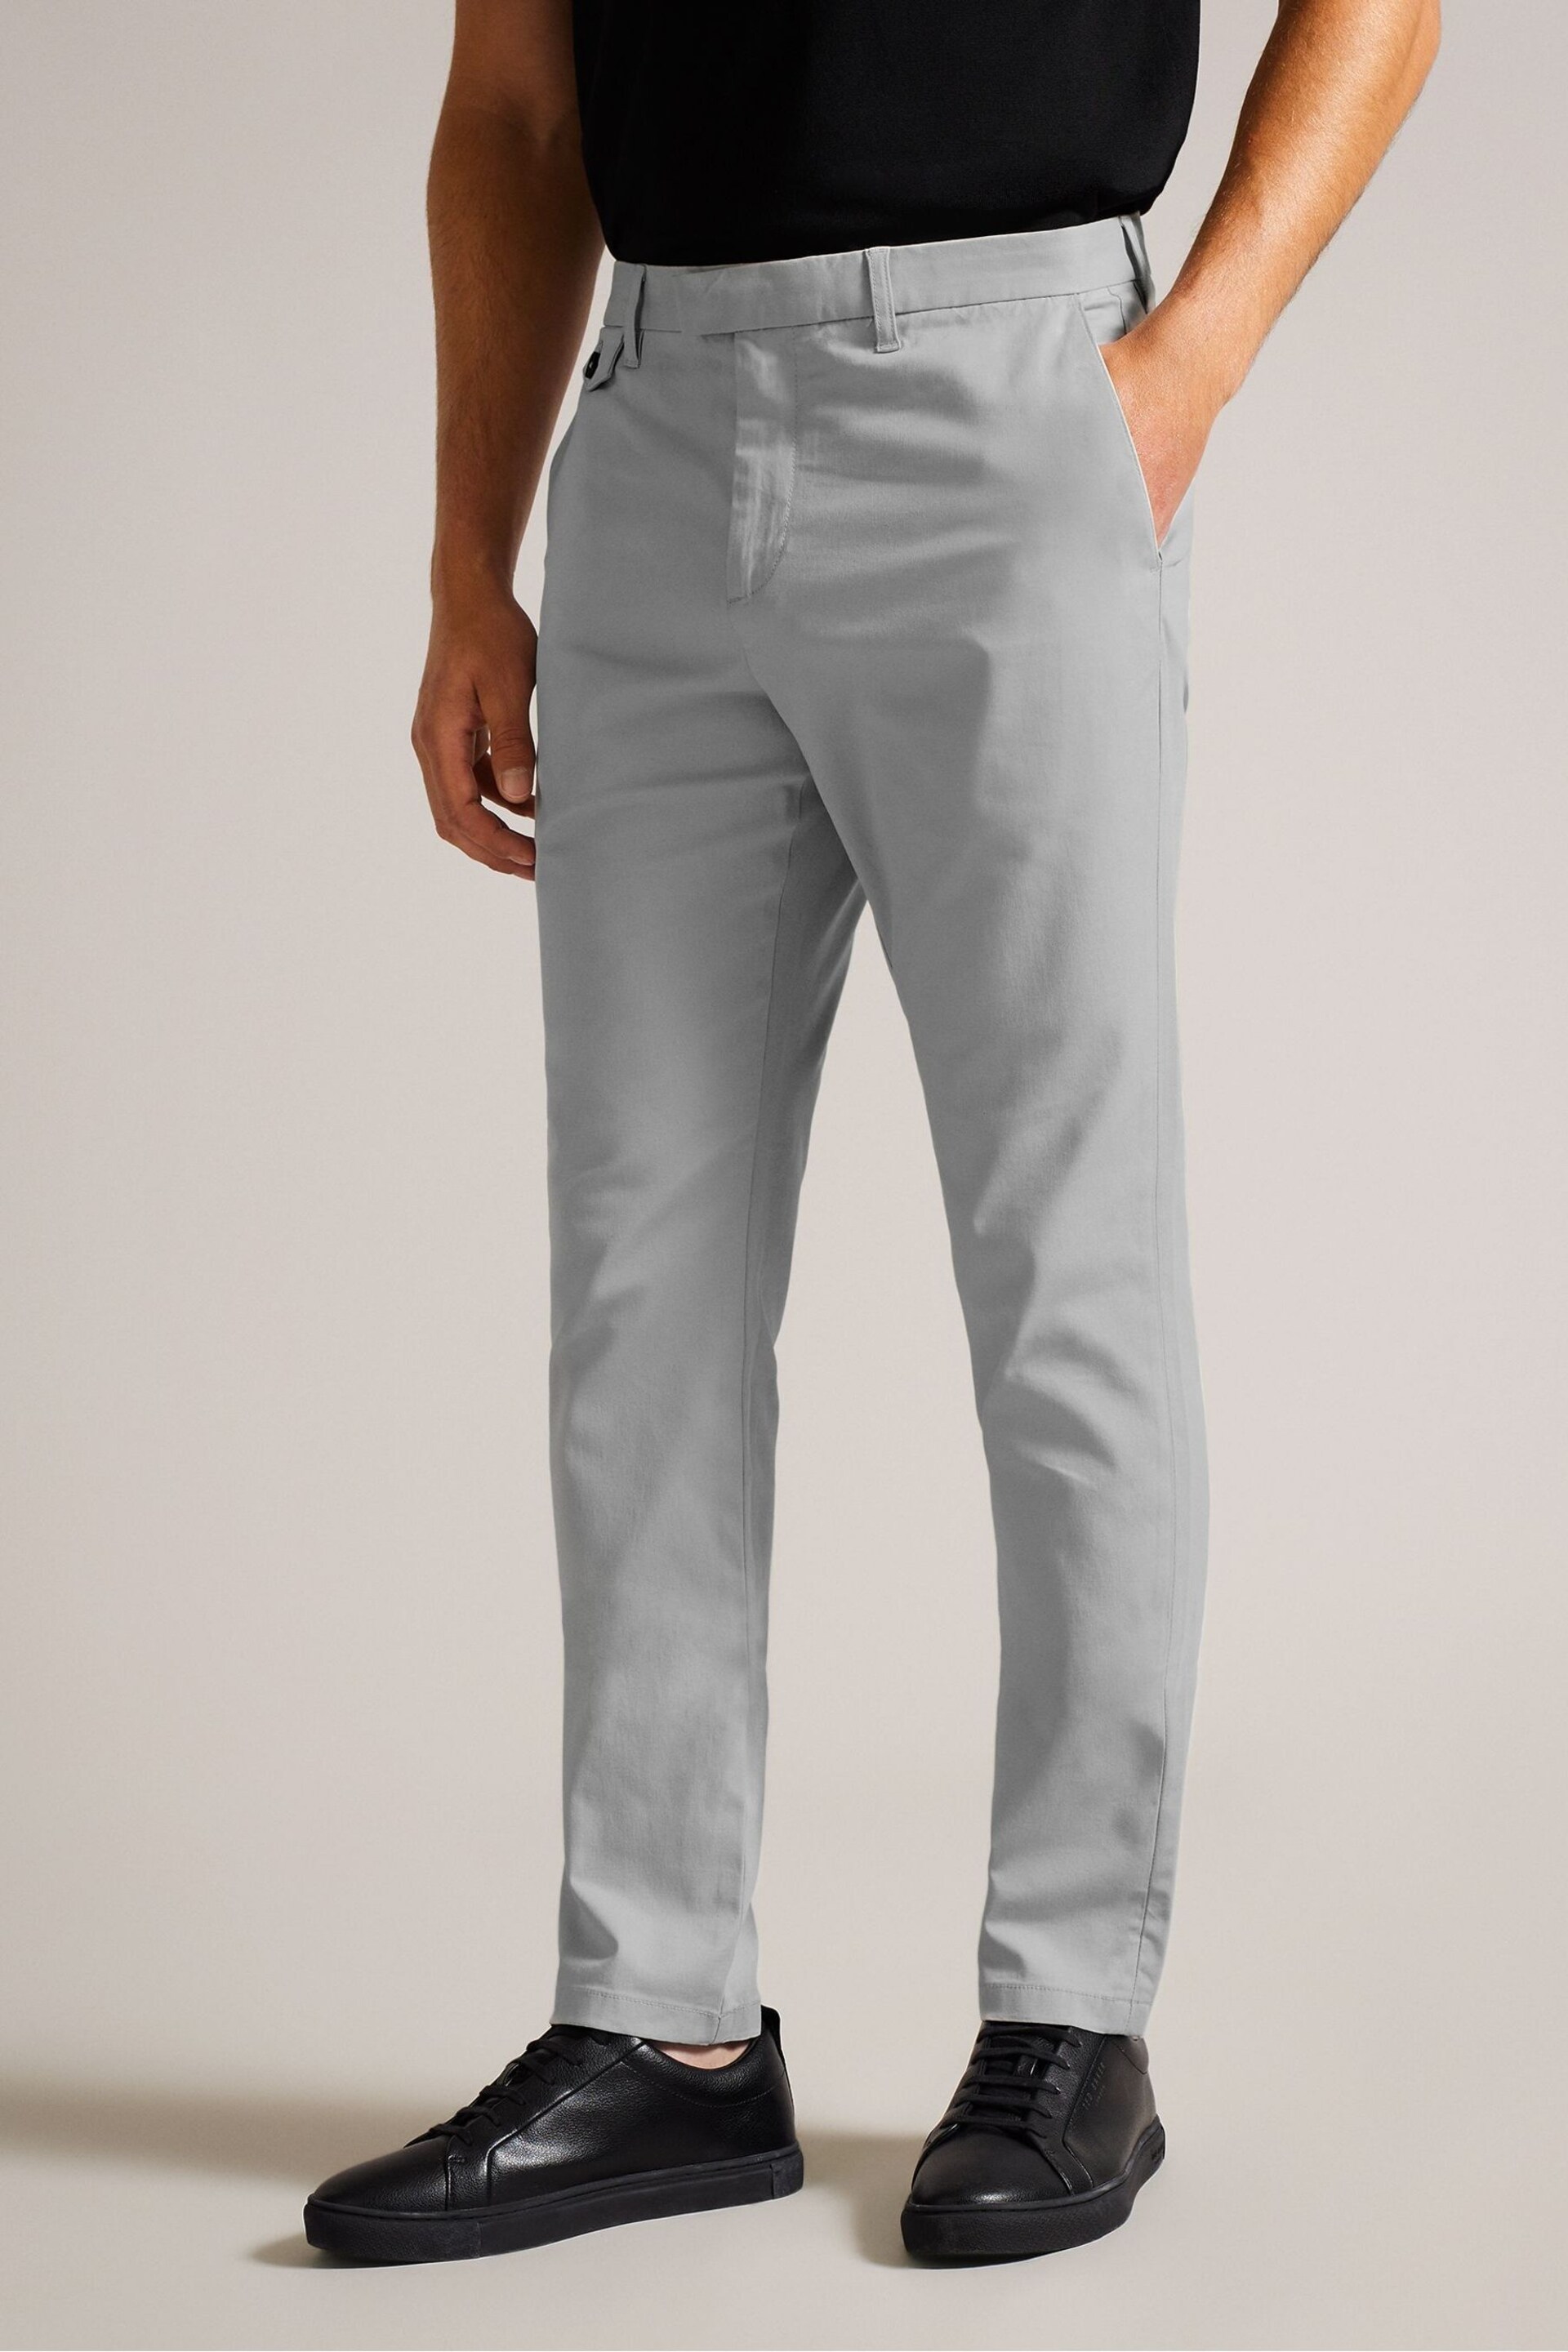 Ted Baker Grey Slim Fit Textured Chino Trousers - Image 1 of 5